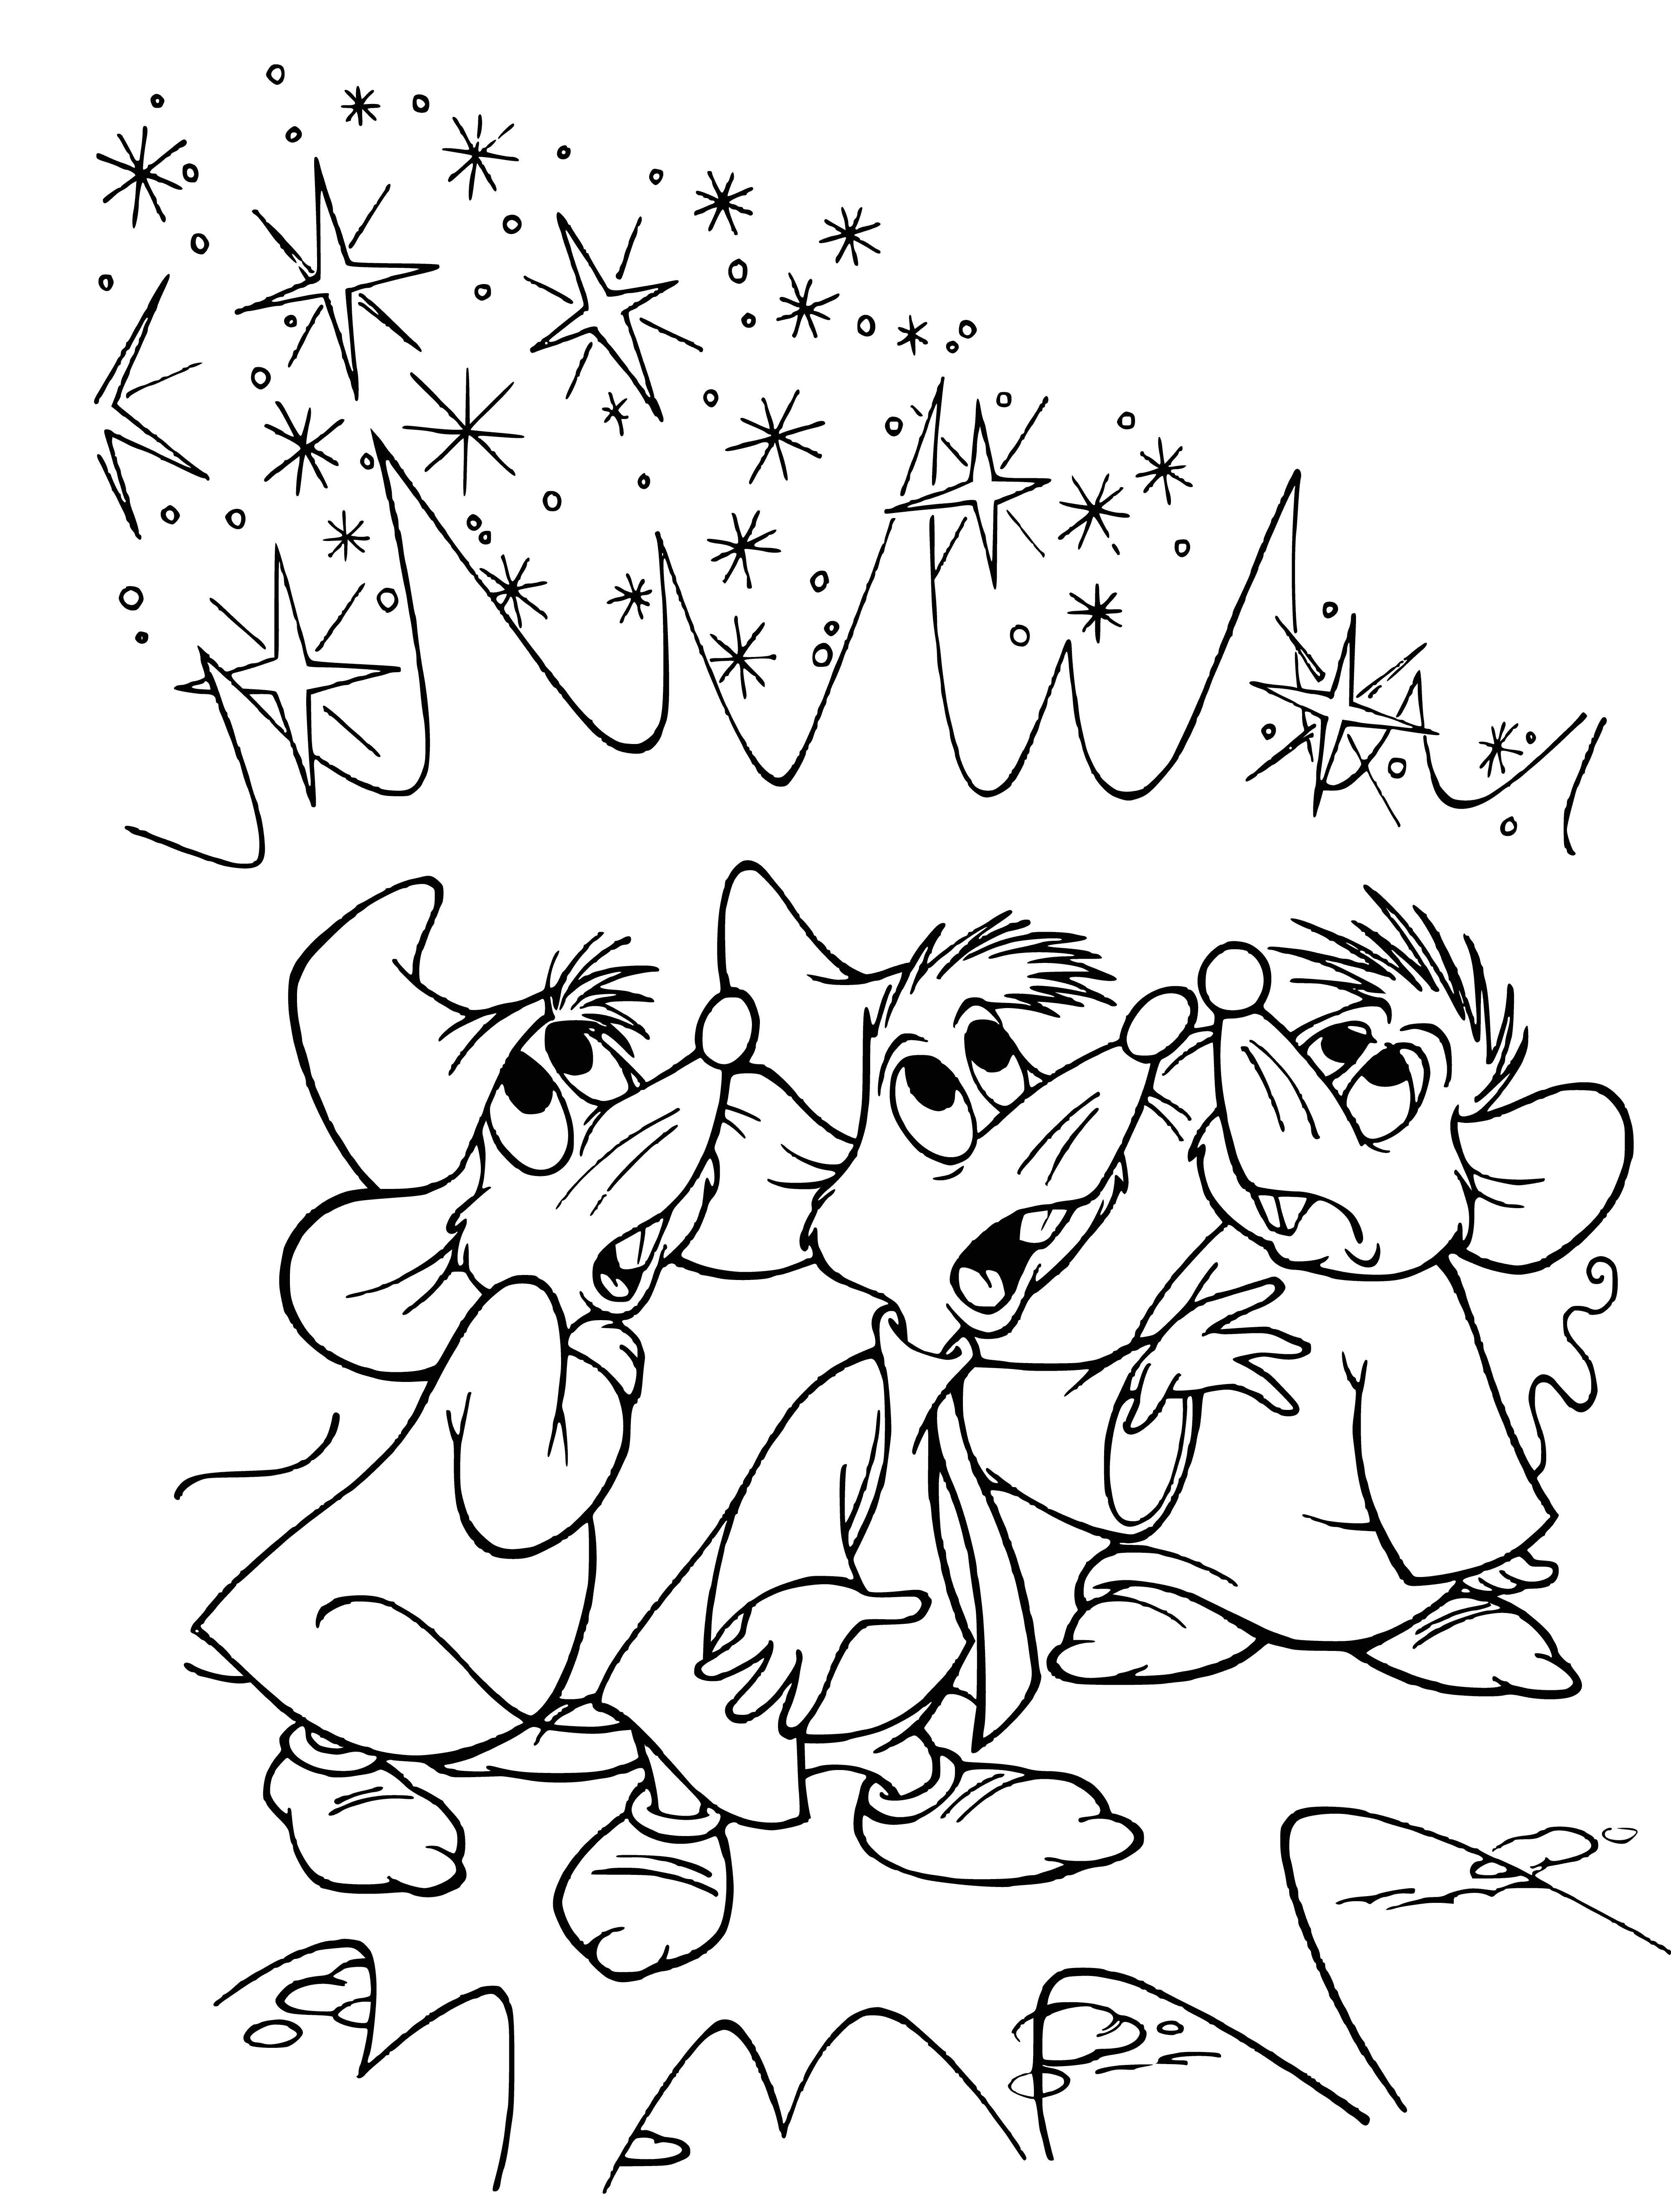 Little mice ... coloring page